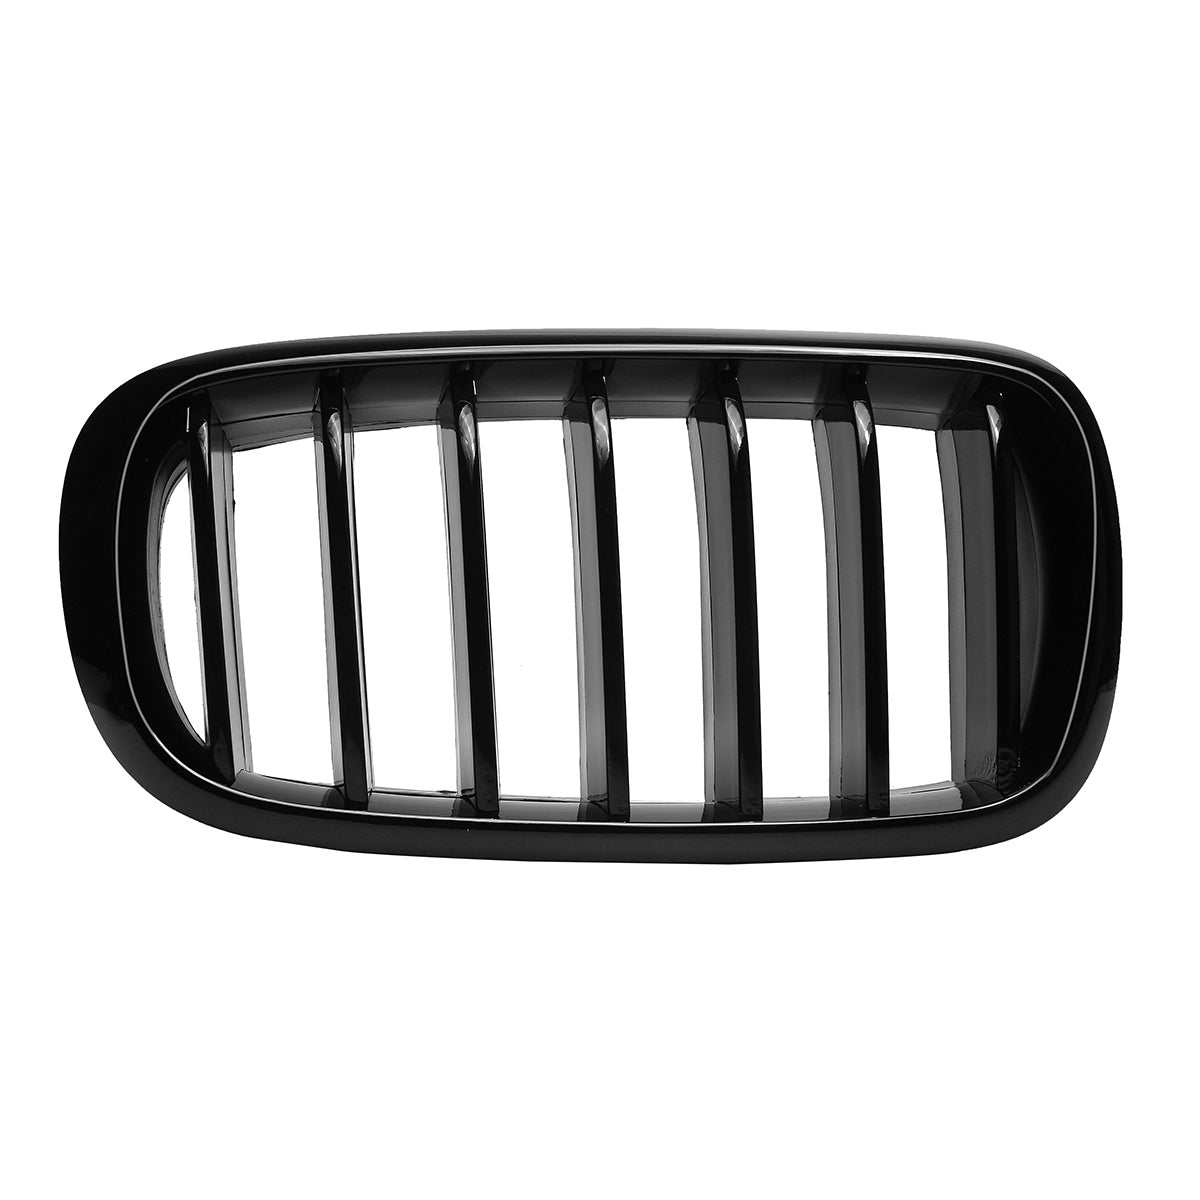 Black One Pair Car Gloss Black Front Kidney Grille Grilles For BMW X5 F15 X6 F16 2014-2017